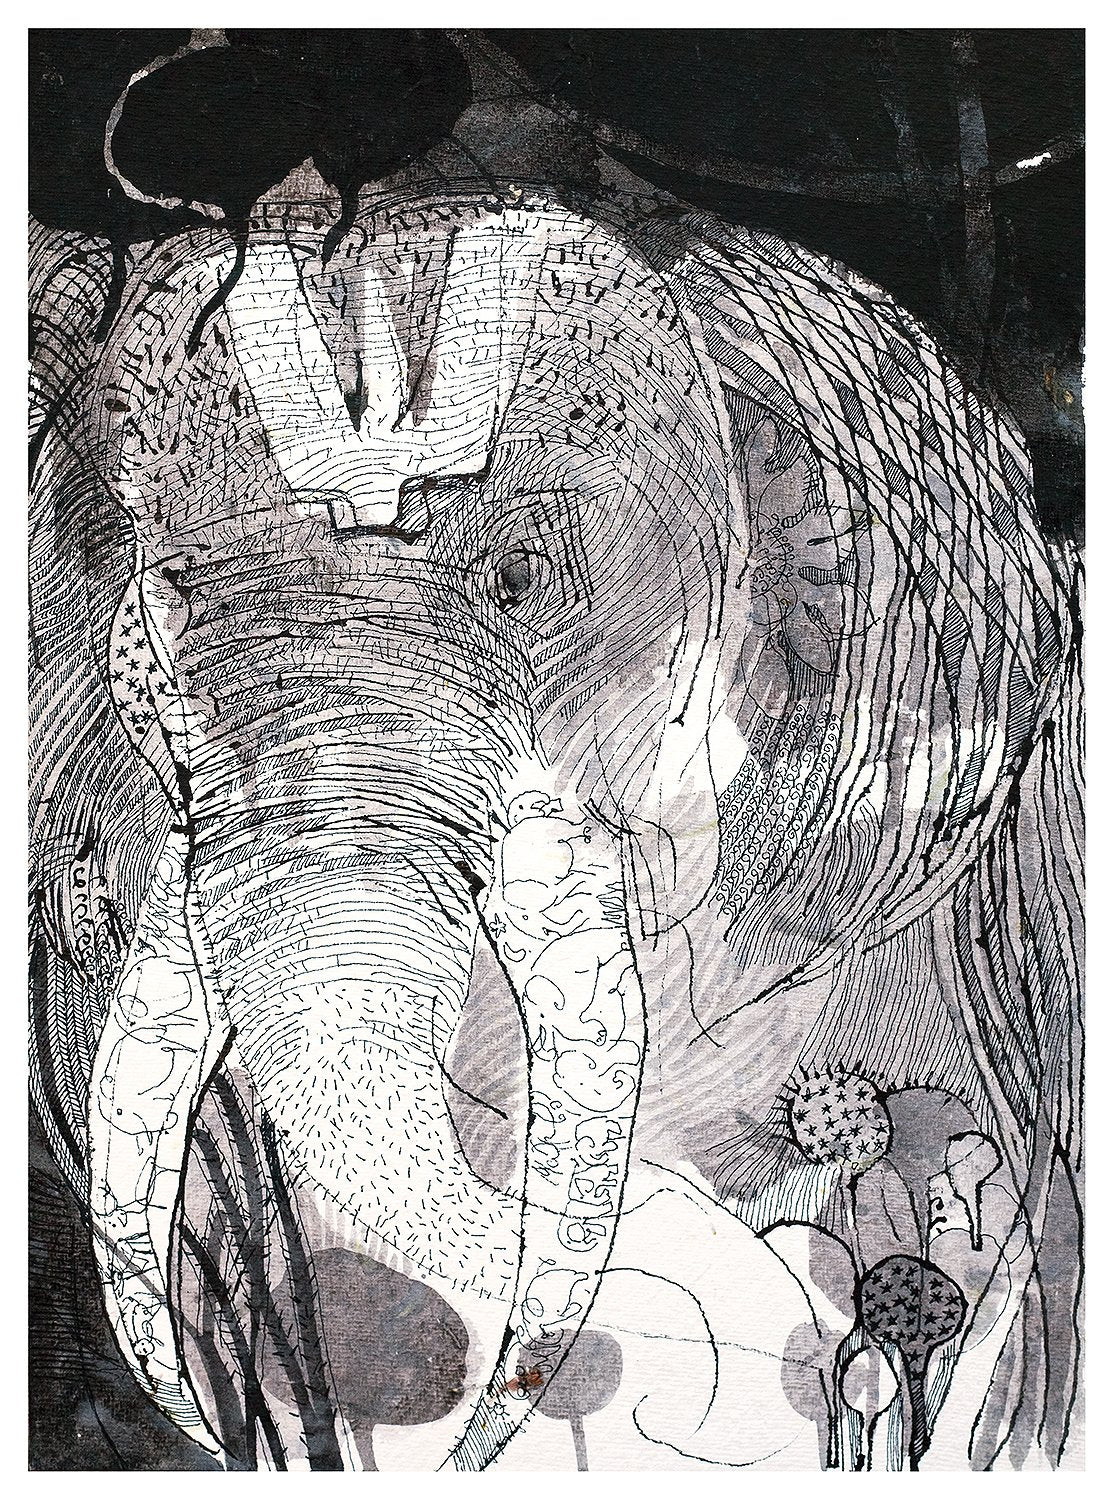 Beside of my Dream 40|A. Vasudevan- Pen and ink on board, 2013,  14.5 x 10.5 inches